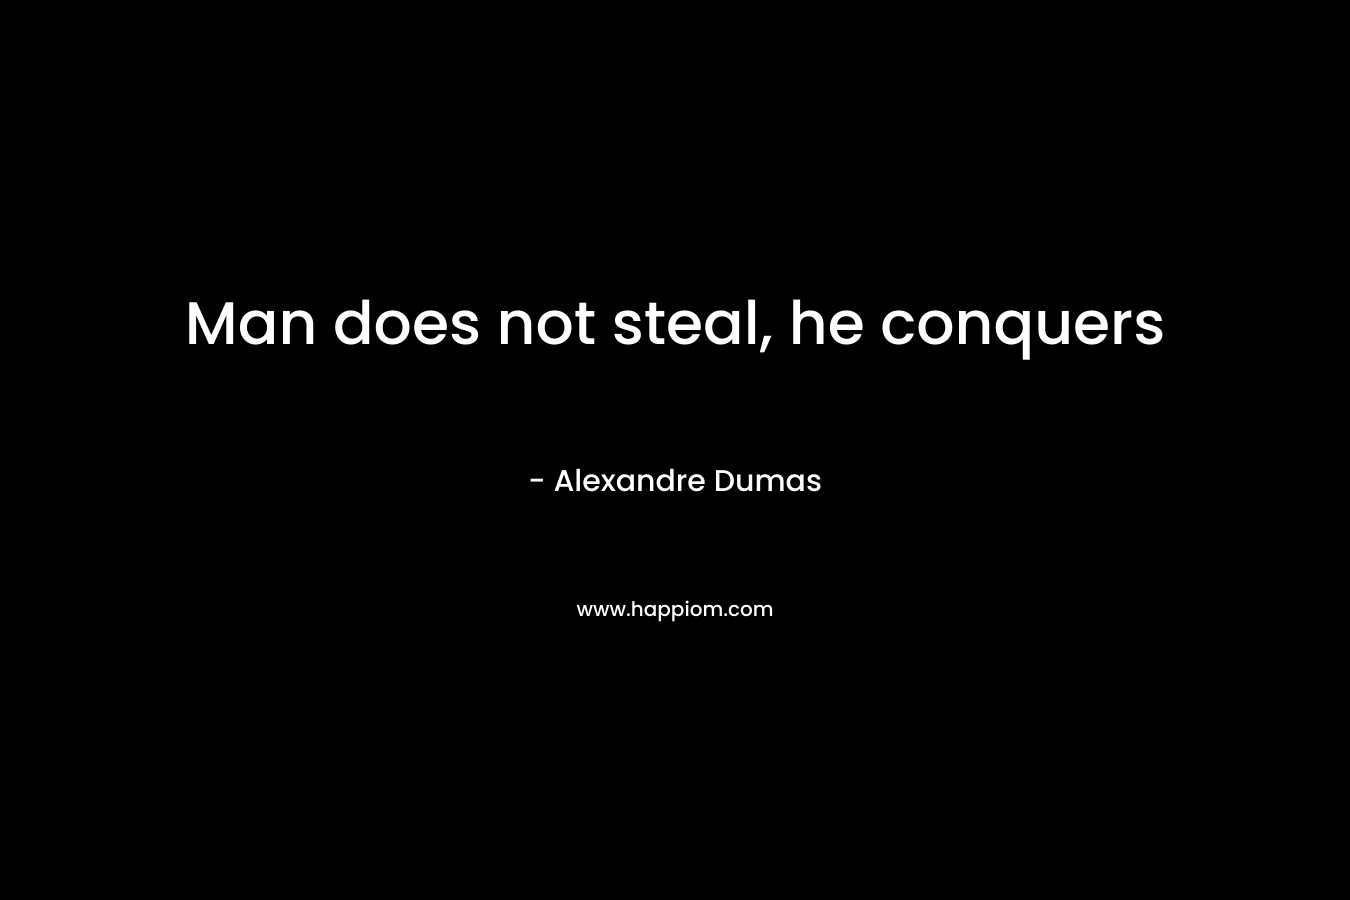 Man does not steal, he conquers